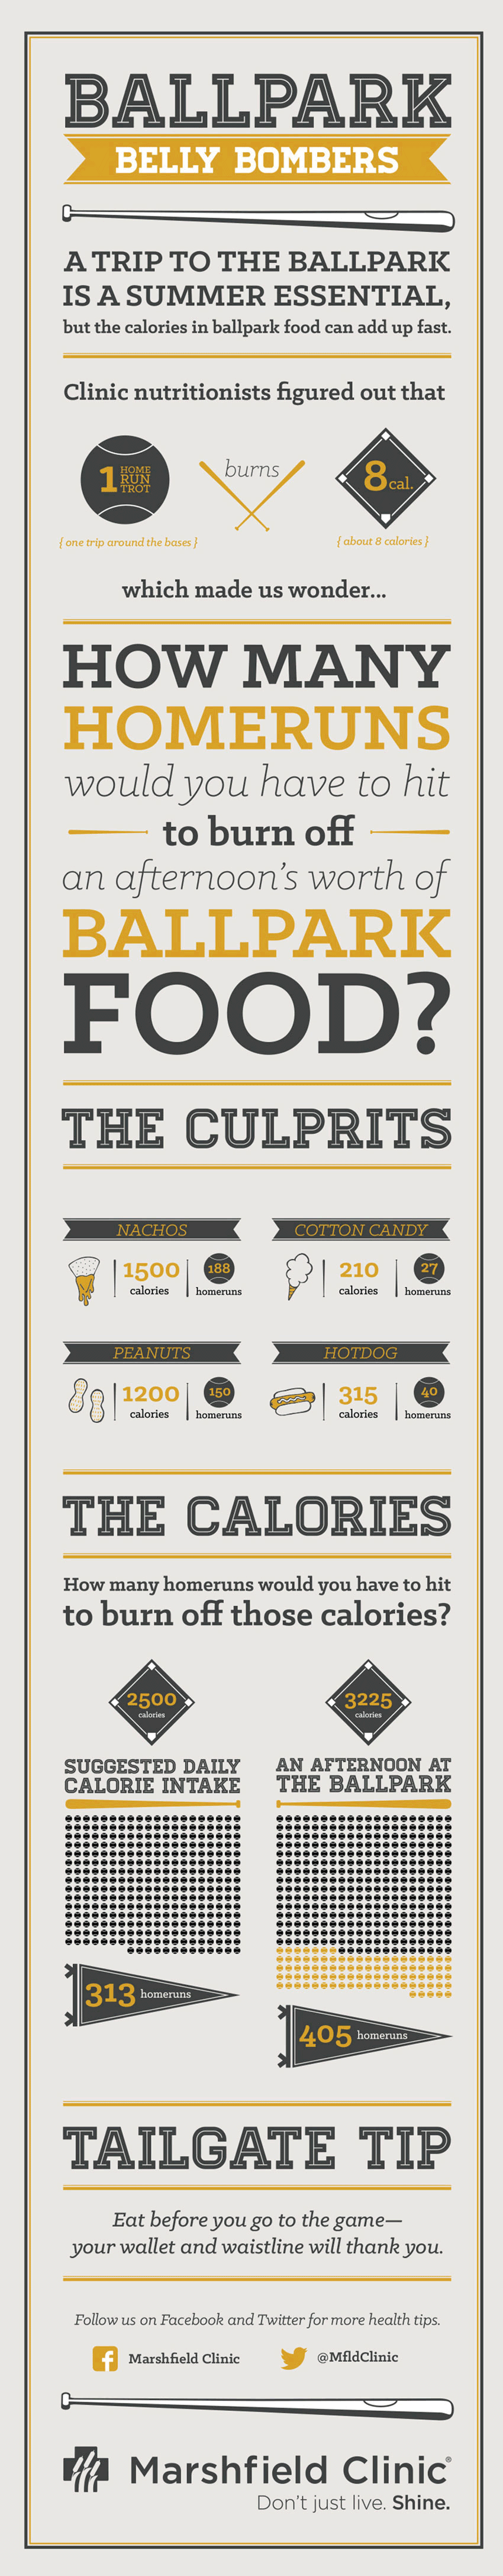 Belly bombers baseball calories infographic